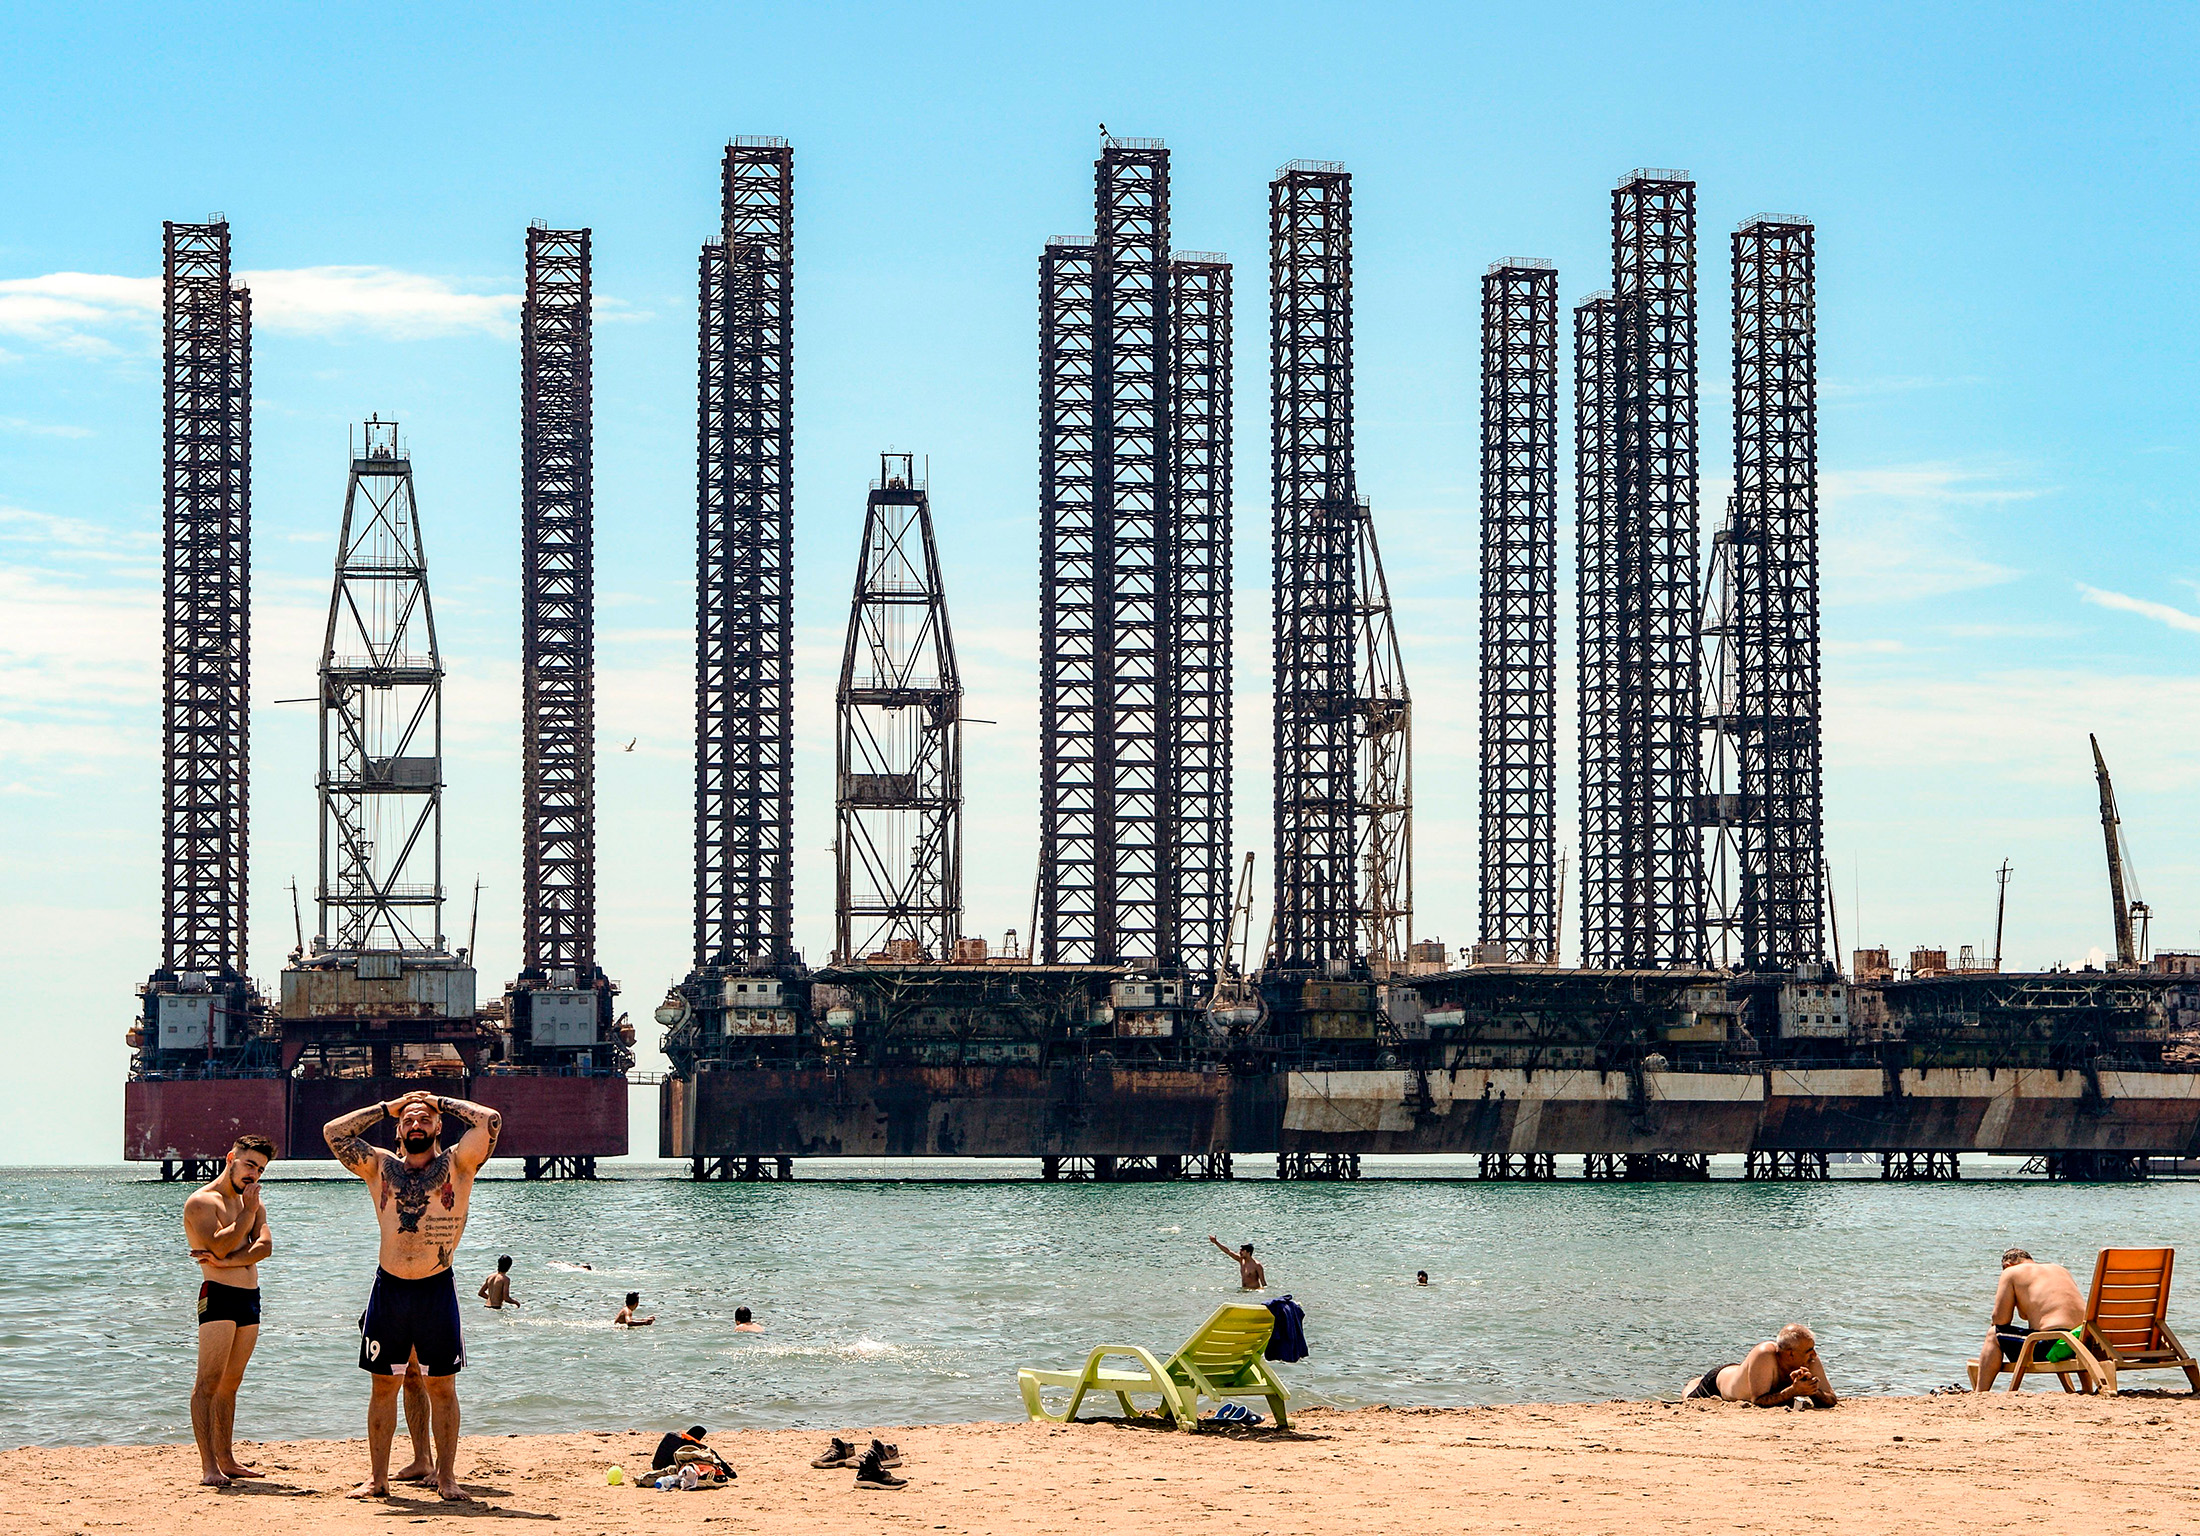 Photo of men on a beach with a line of oil rigs looming over them